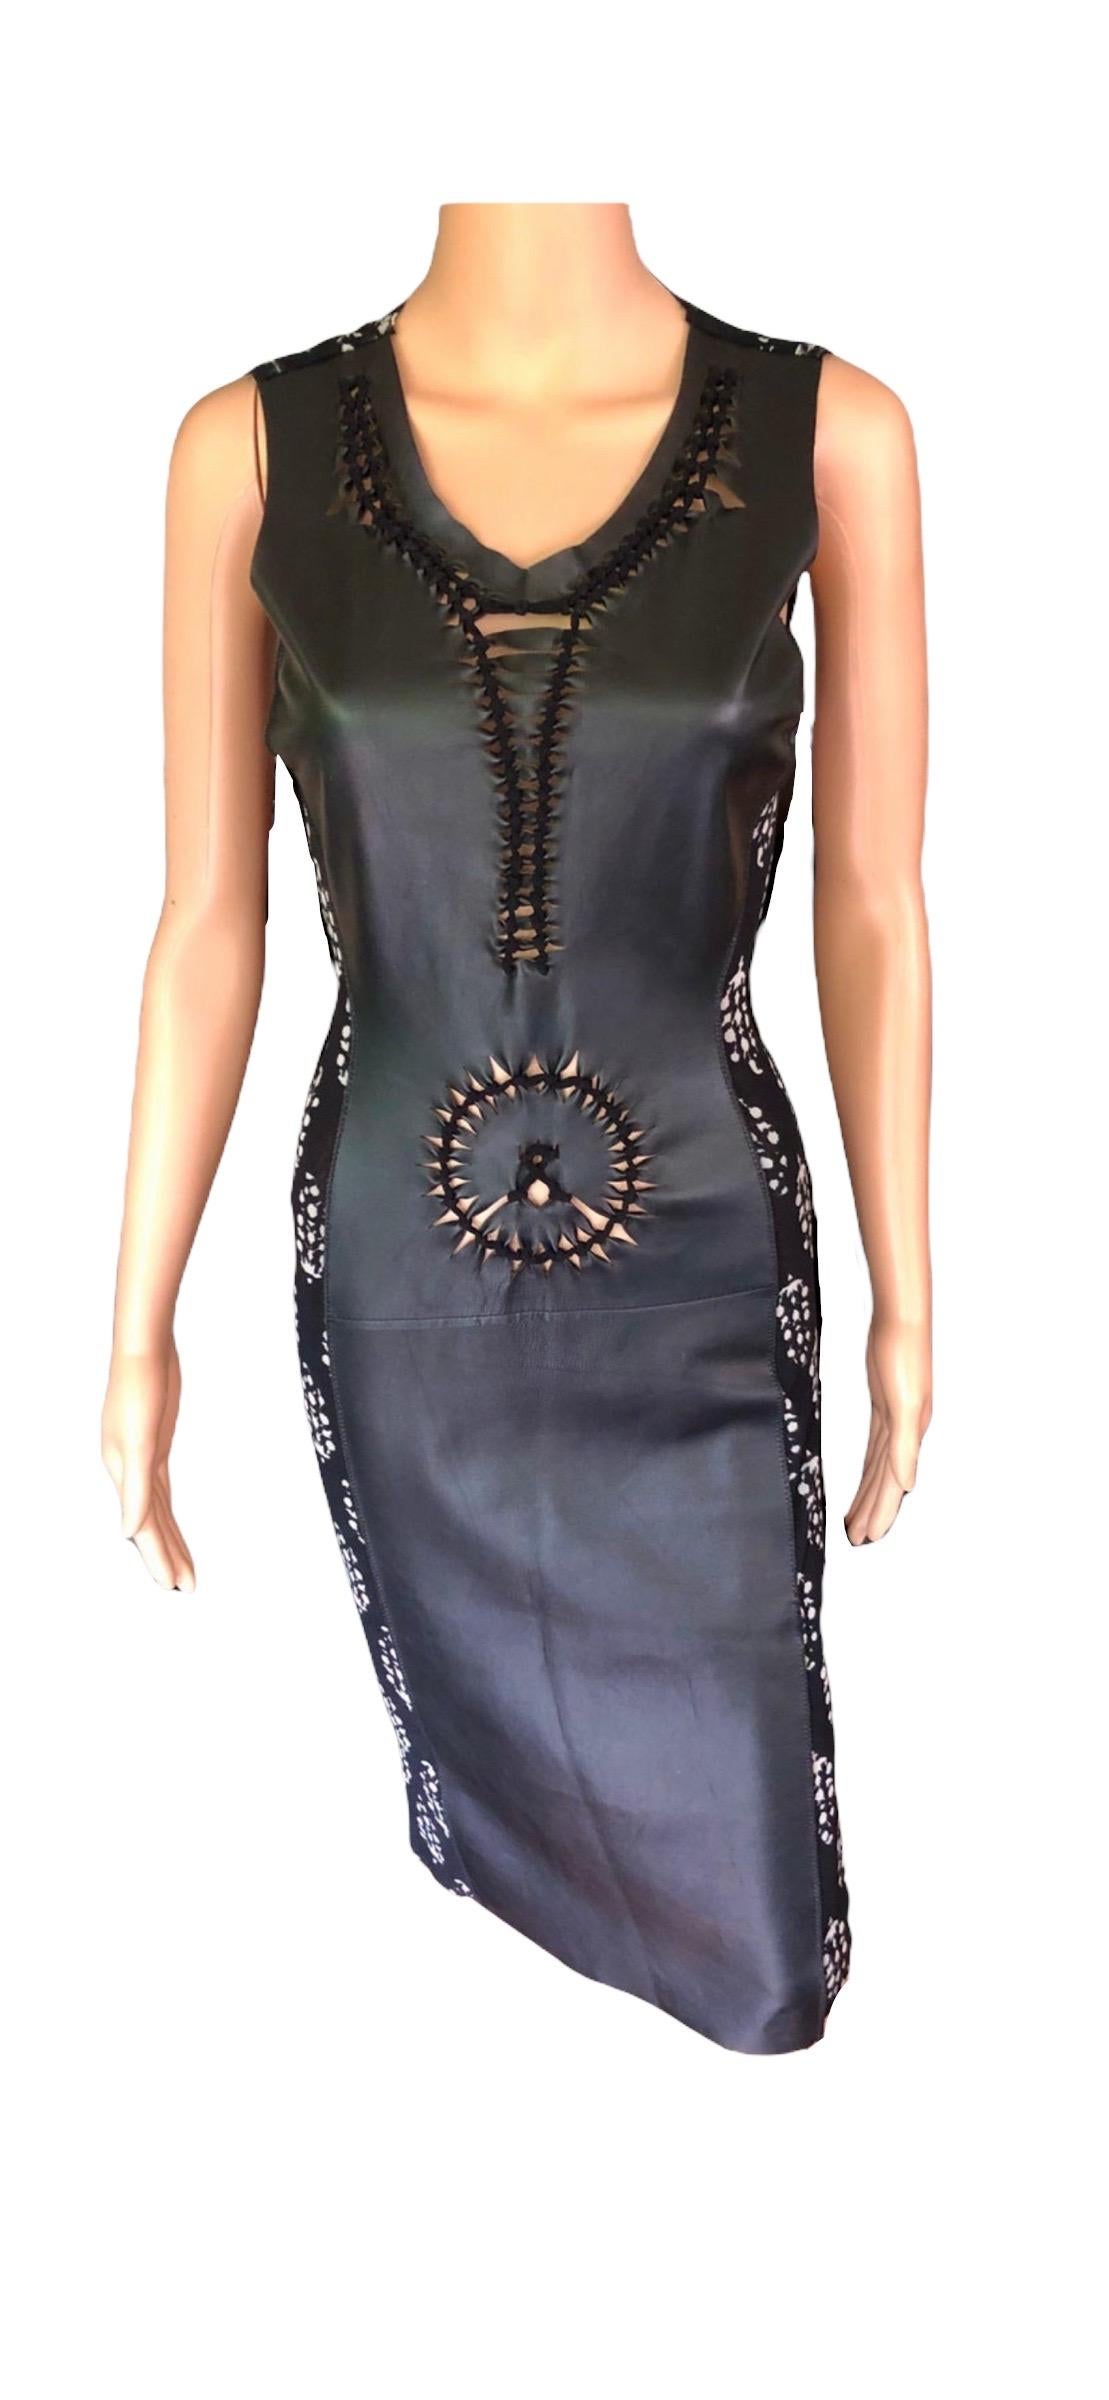 Jean Paul Gaultier Soleil Leather and Mesh Cutout Bodycon Dress Size M

